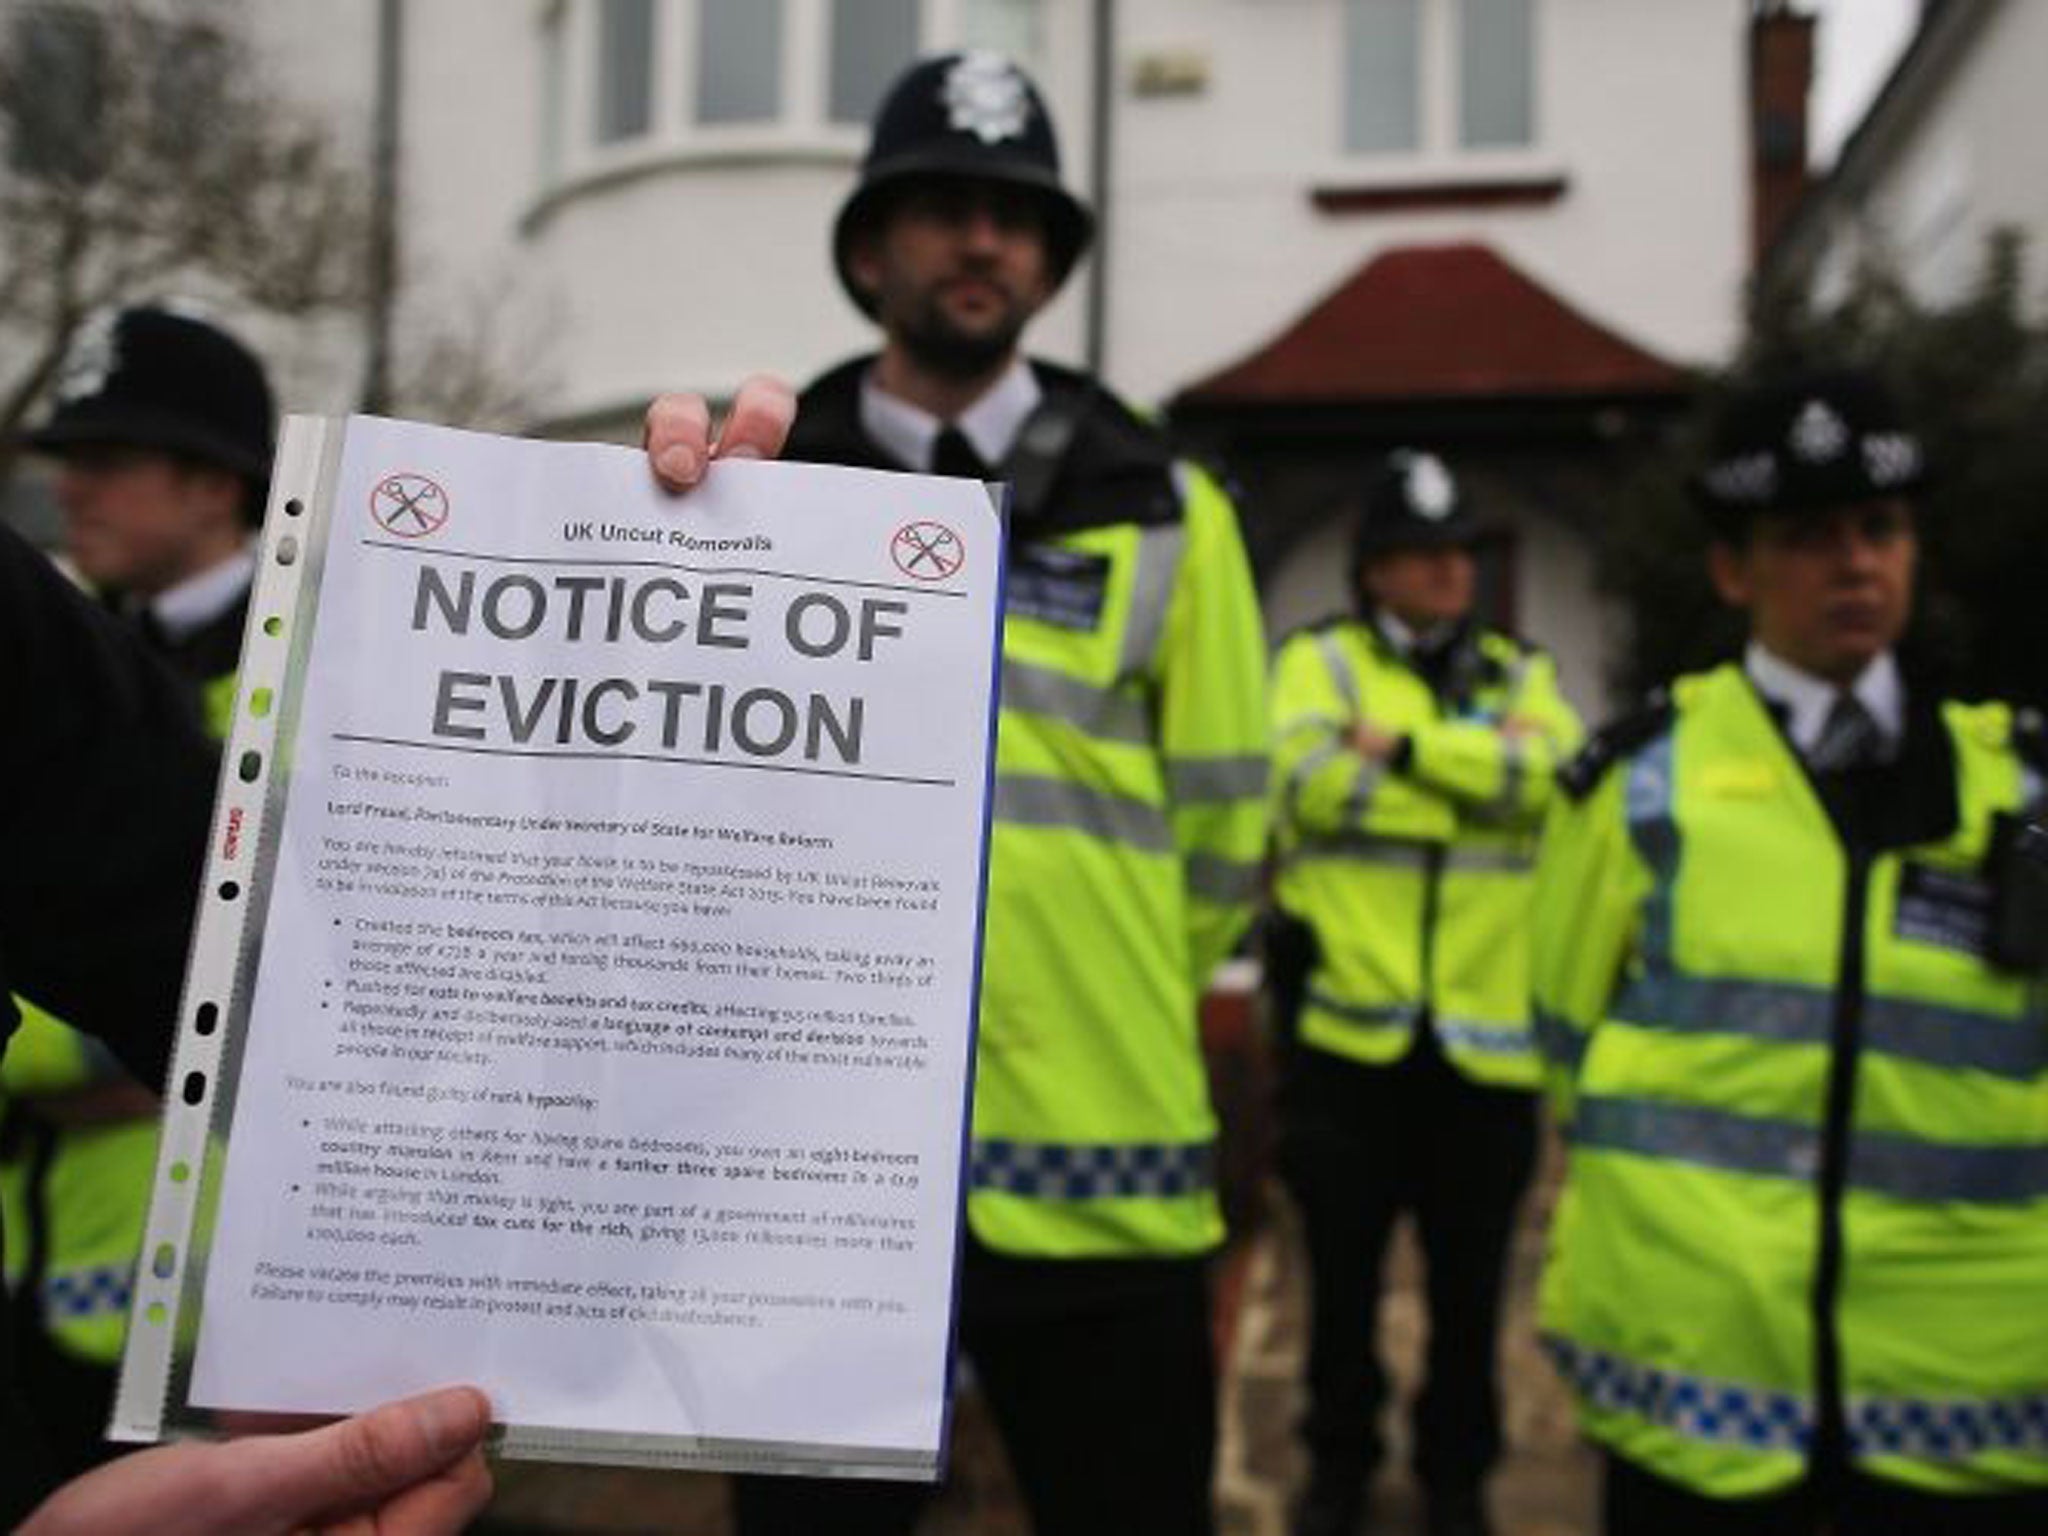 Social housing tenants in trouble over the rent face eviction